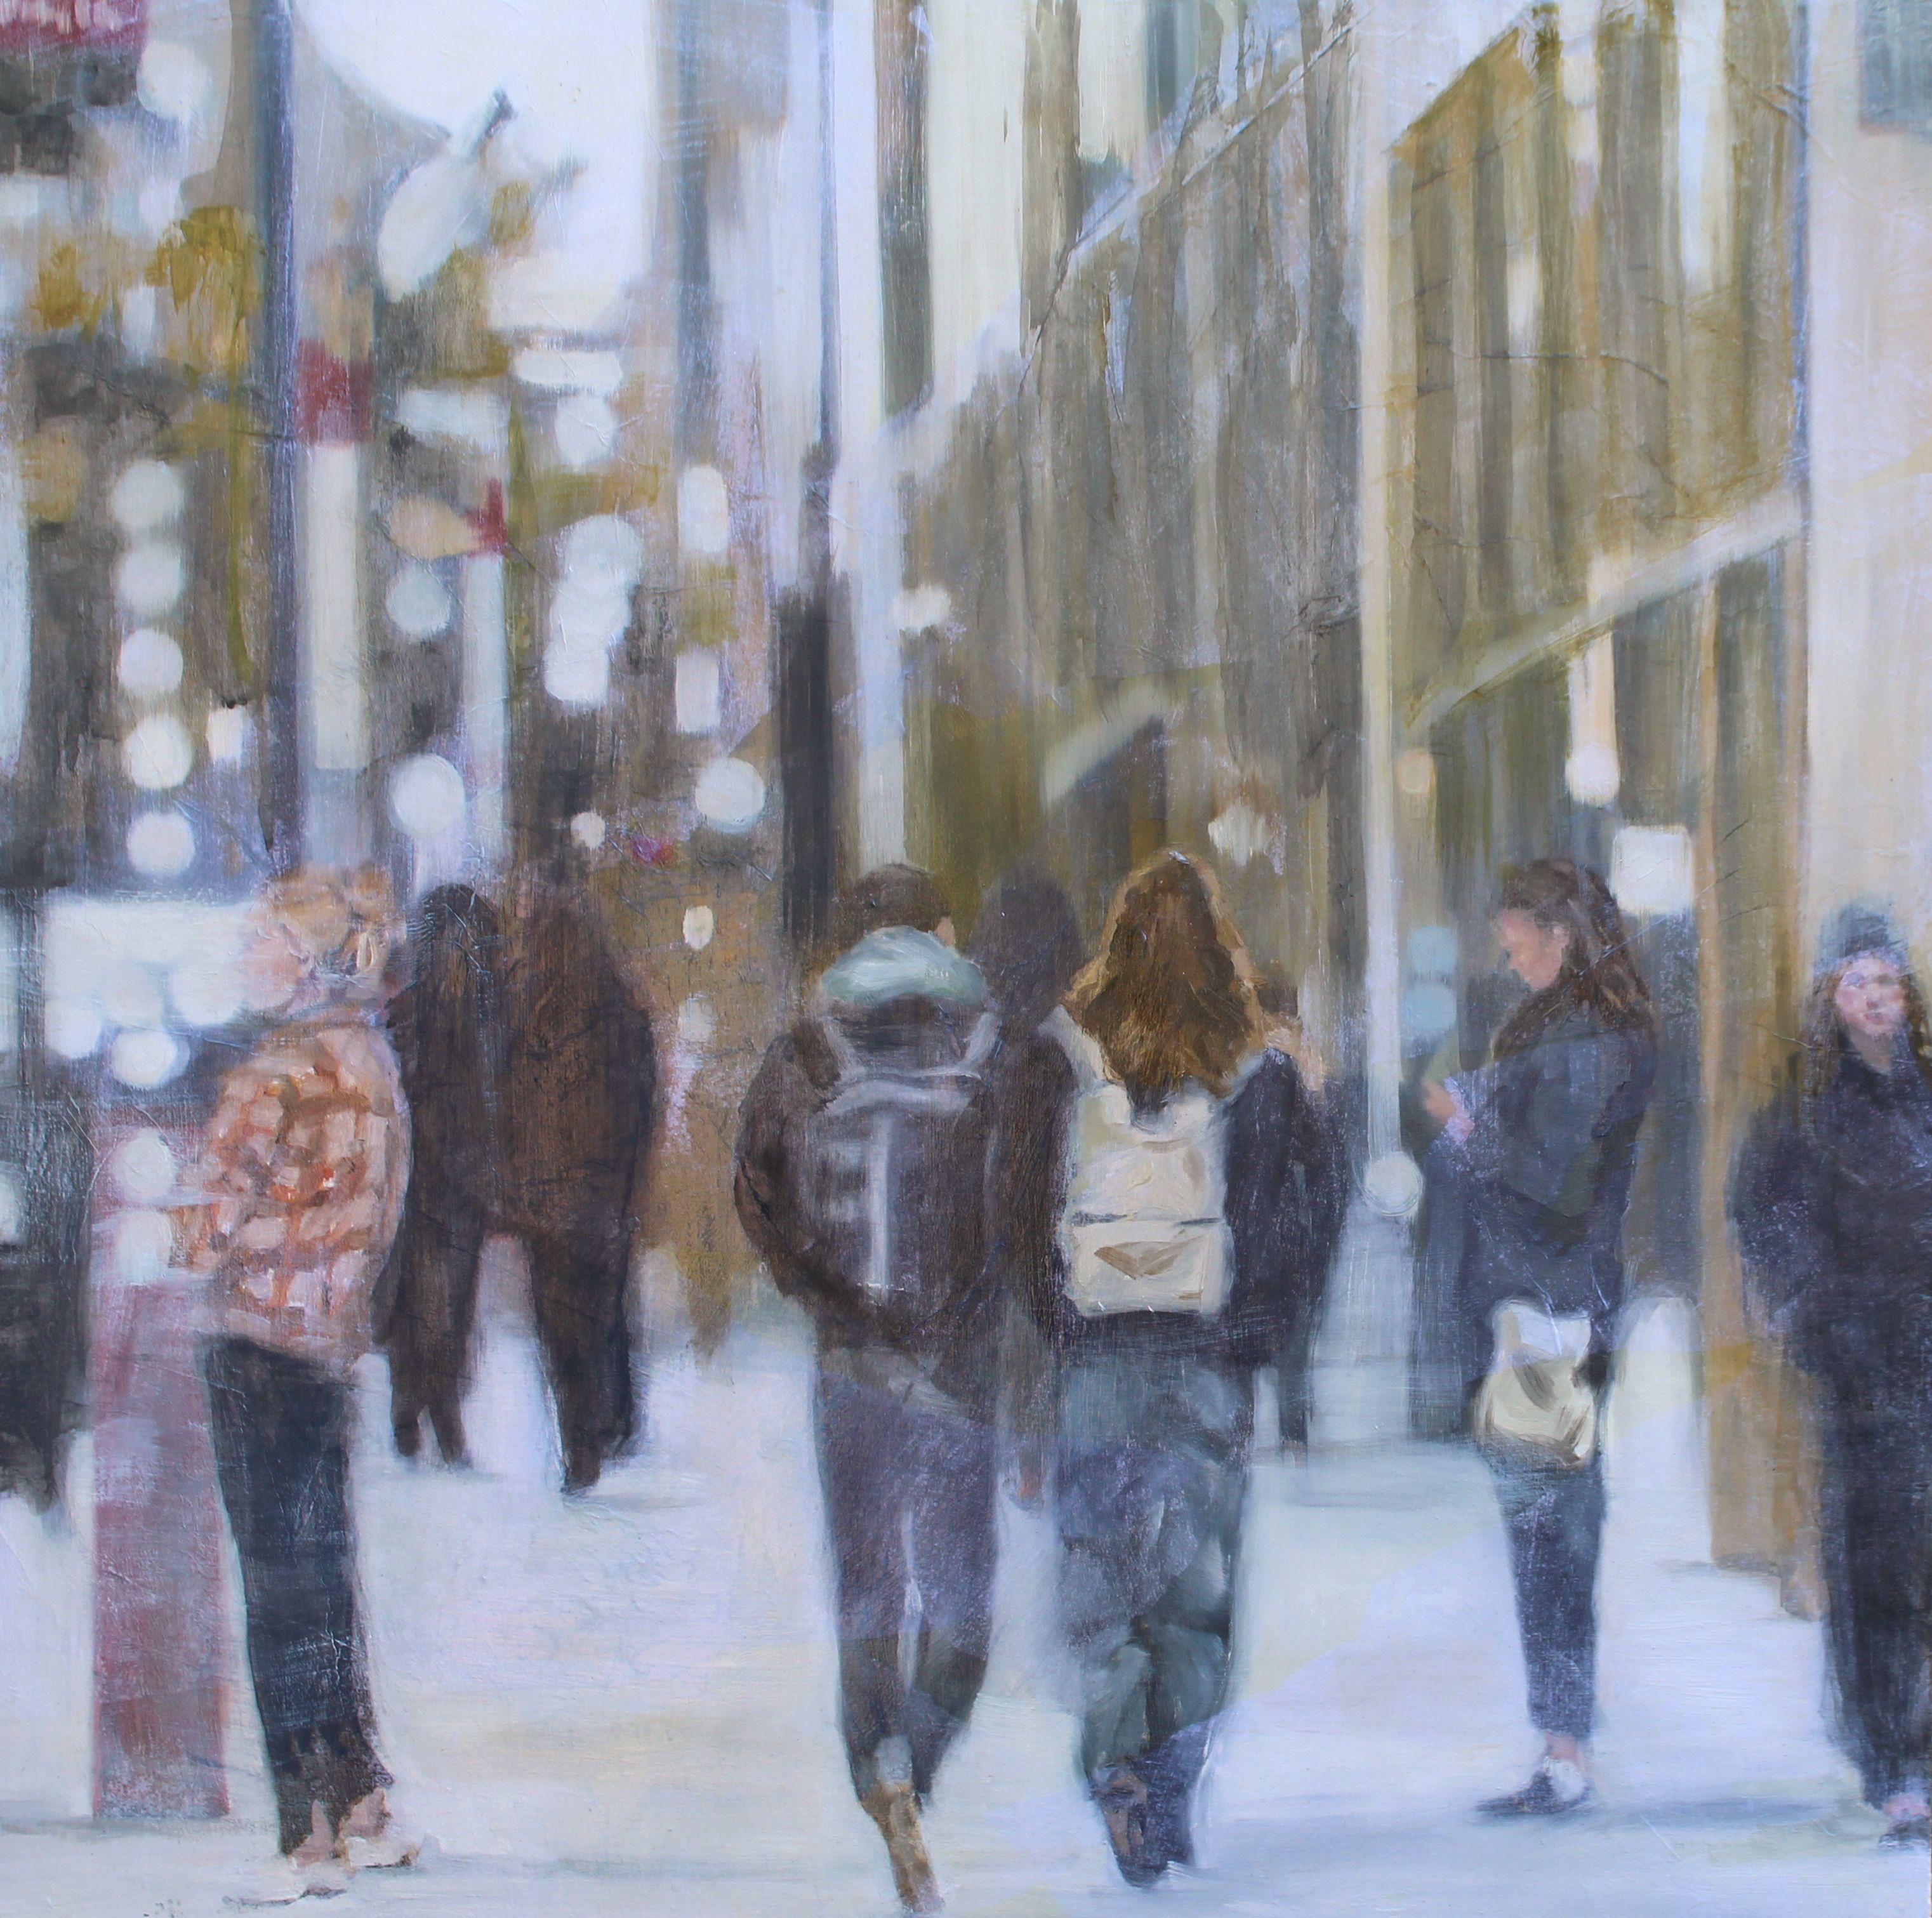 Walking in the city I was struck by the gratitude of being able to go about life. The everyday coming and going that I sometimes take for granted suddenly brought me joy. This painting captured that moment. The scene is painted and then covered with